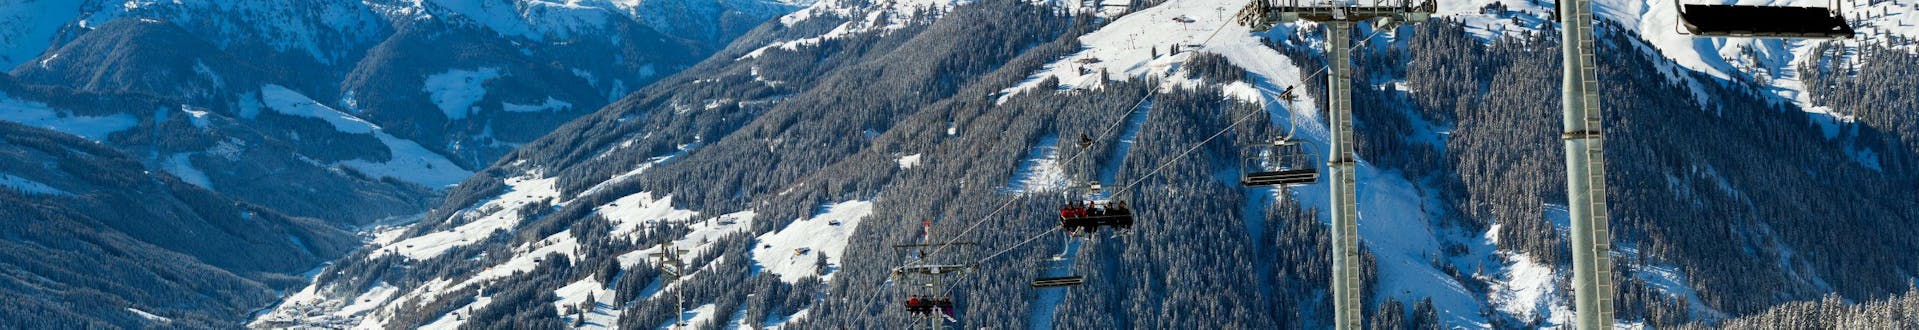 A panoramic view of the Zillertal Valley in which the local ski schools based in Zell am Ziller offer ski lessons for those who wish to learn to ski.